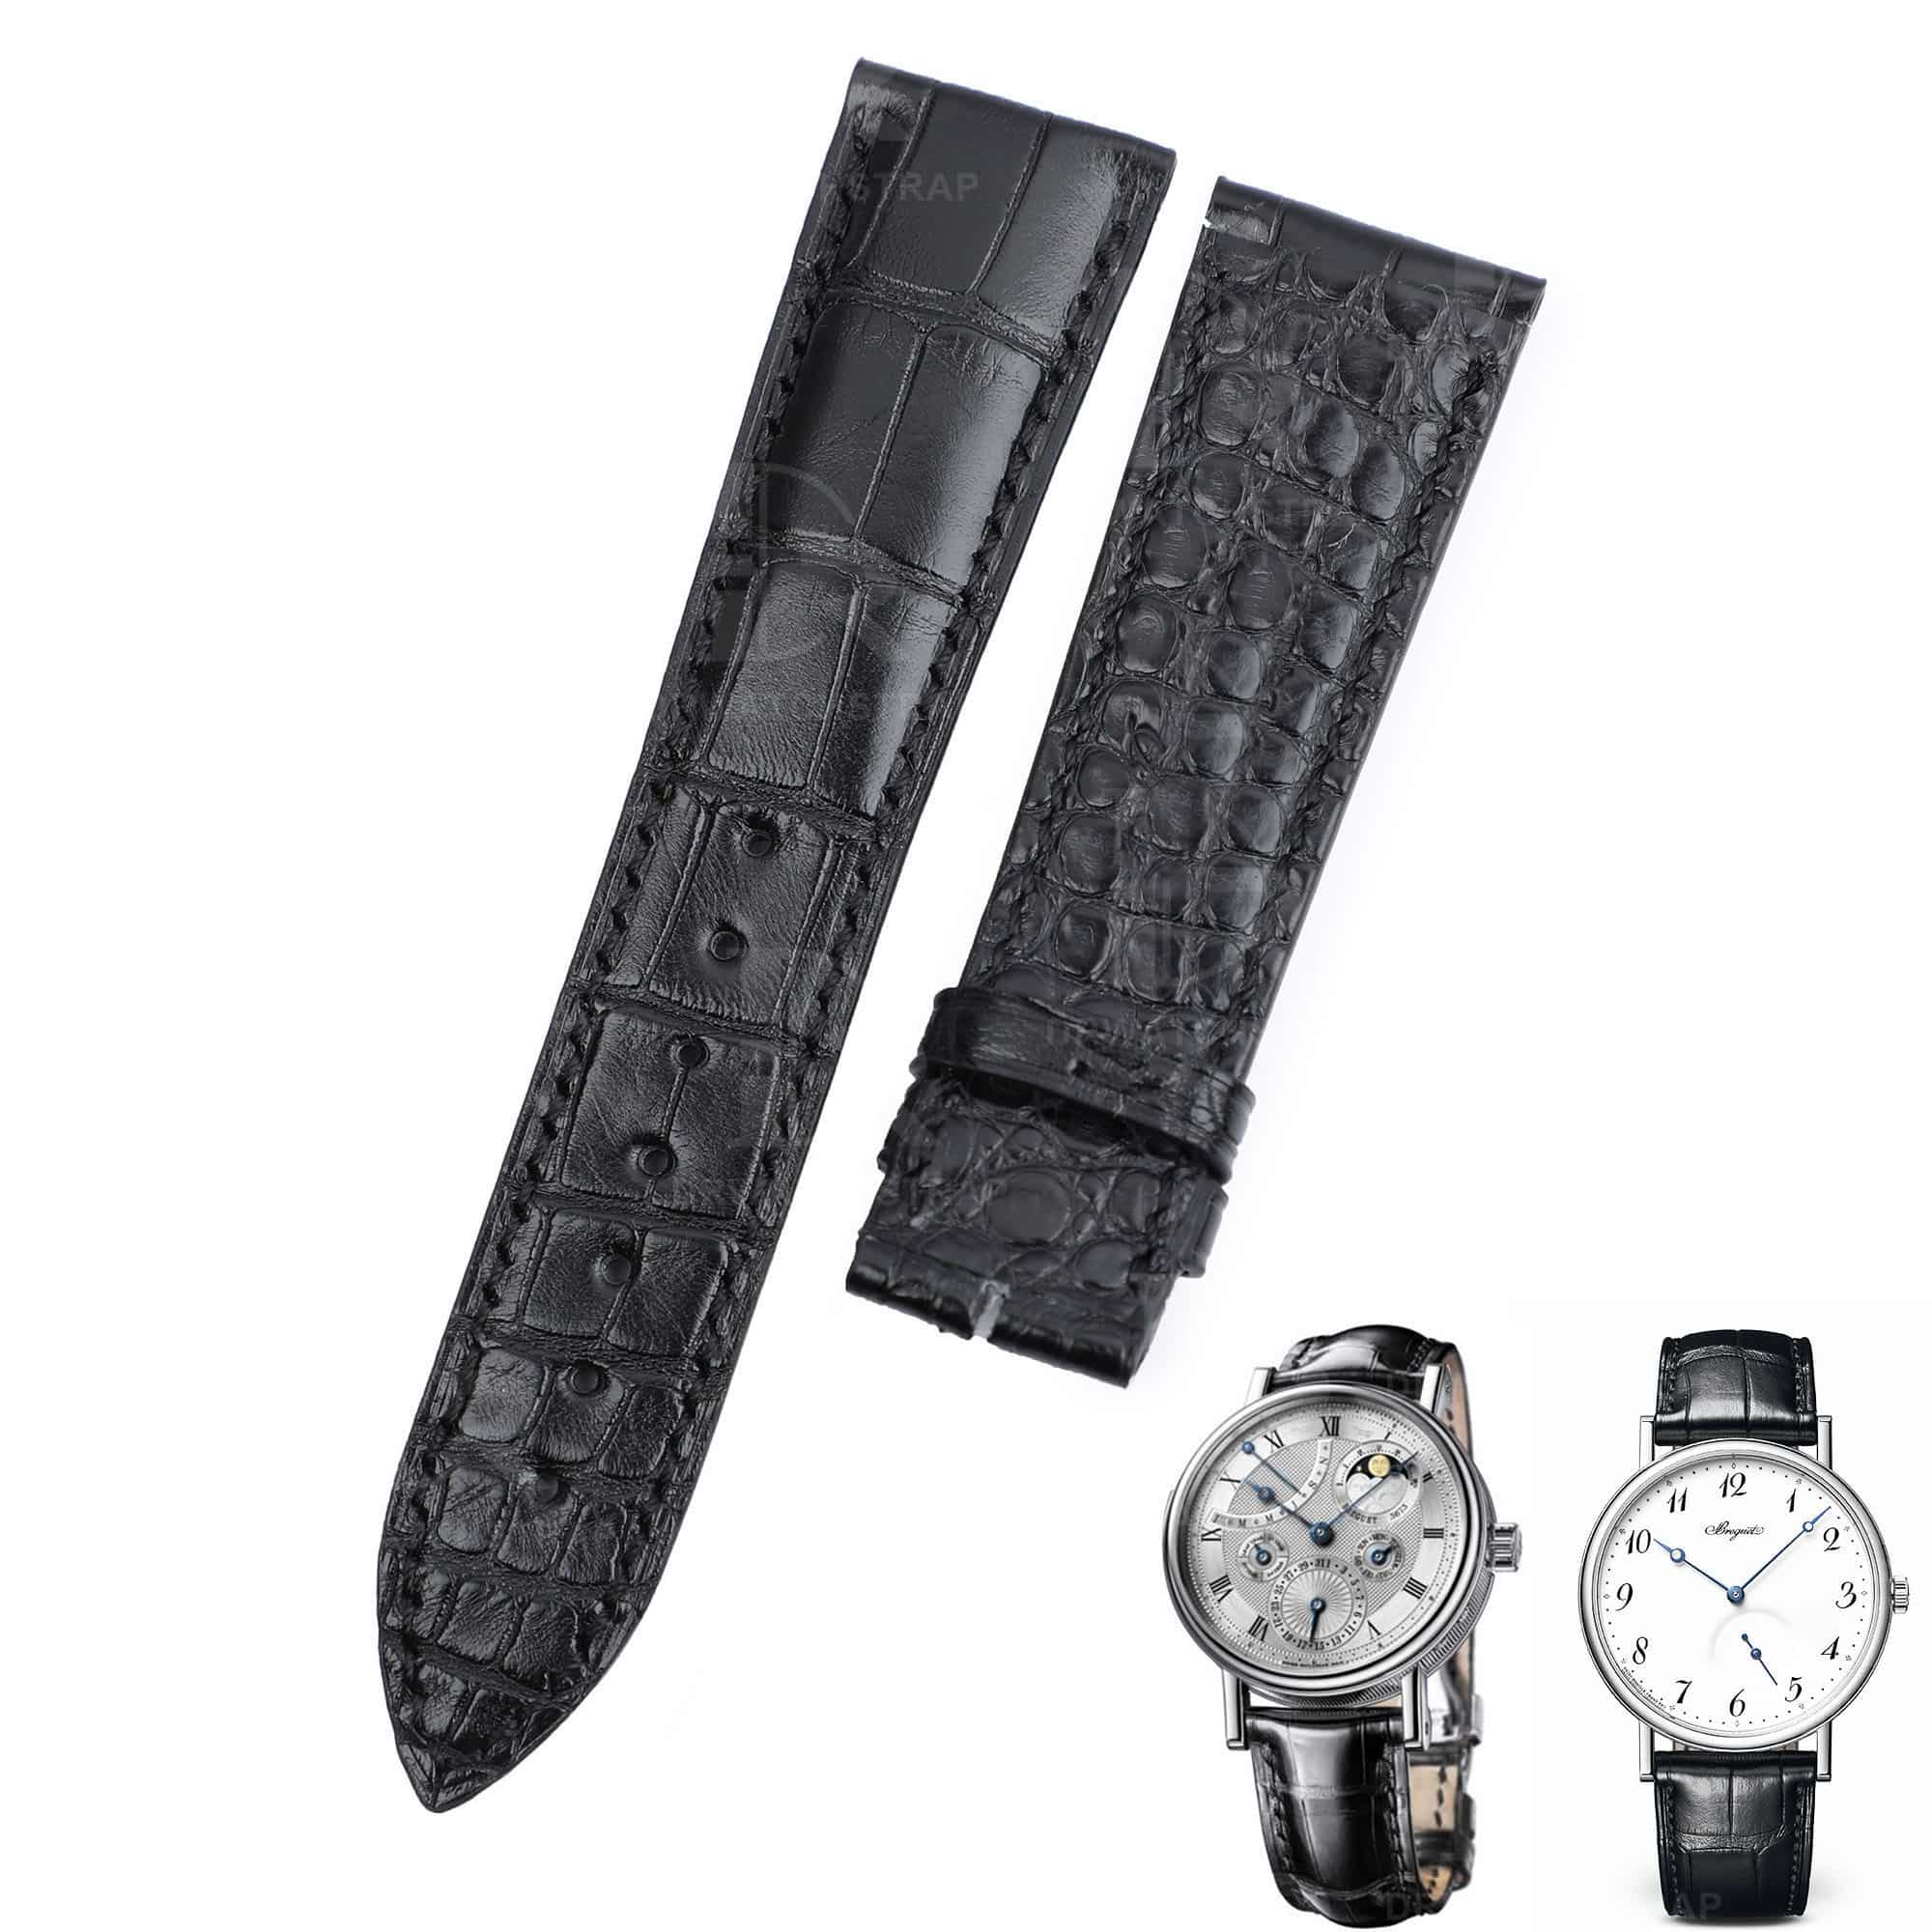 Custom Double Side Alligator replacement leather watchbands for Breguet Tradition straps